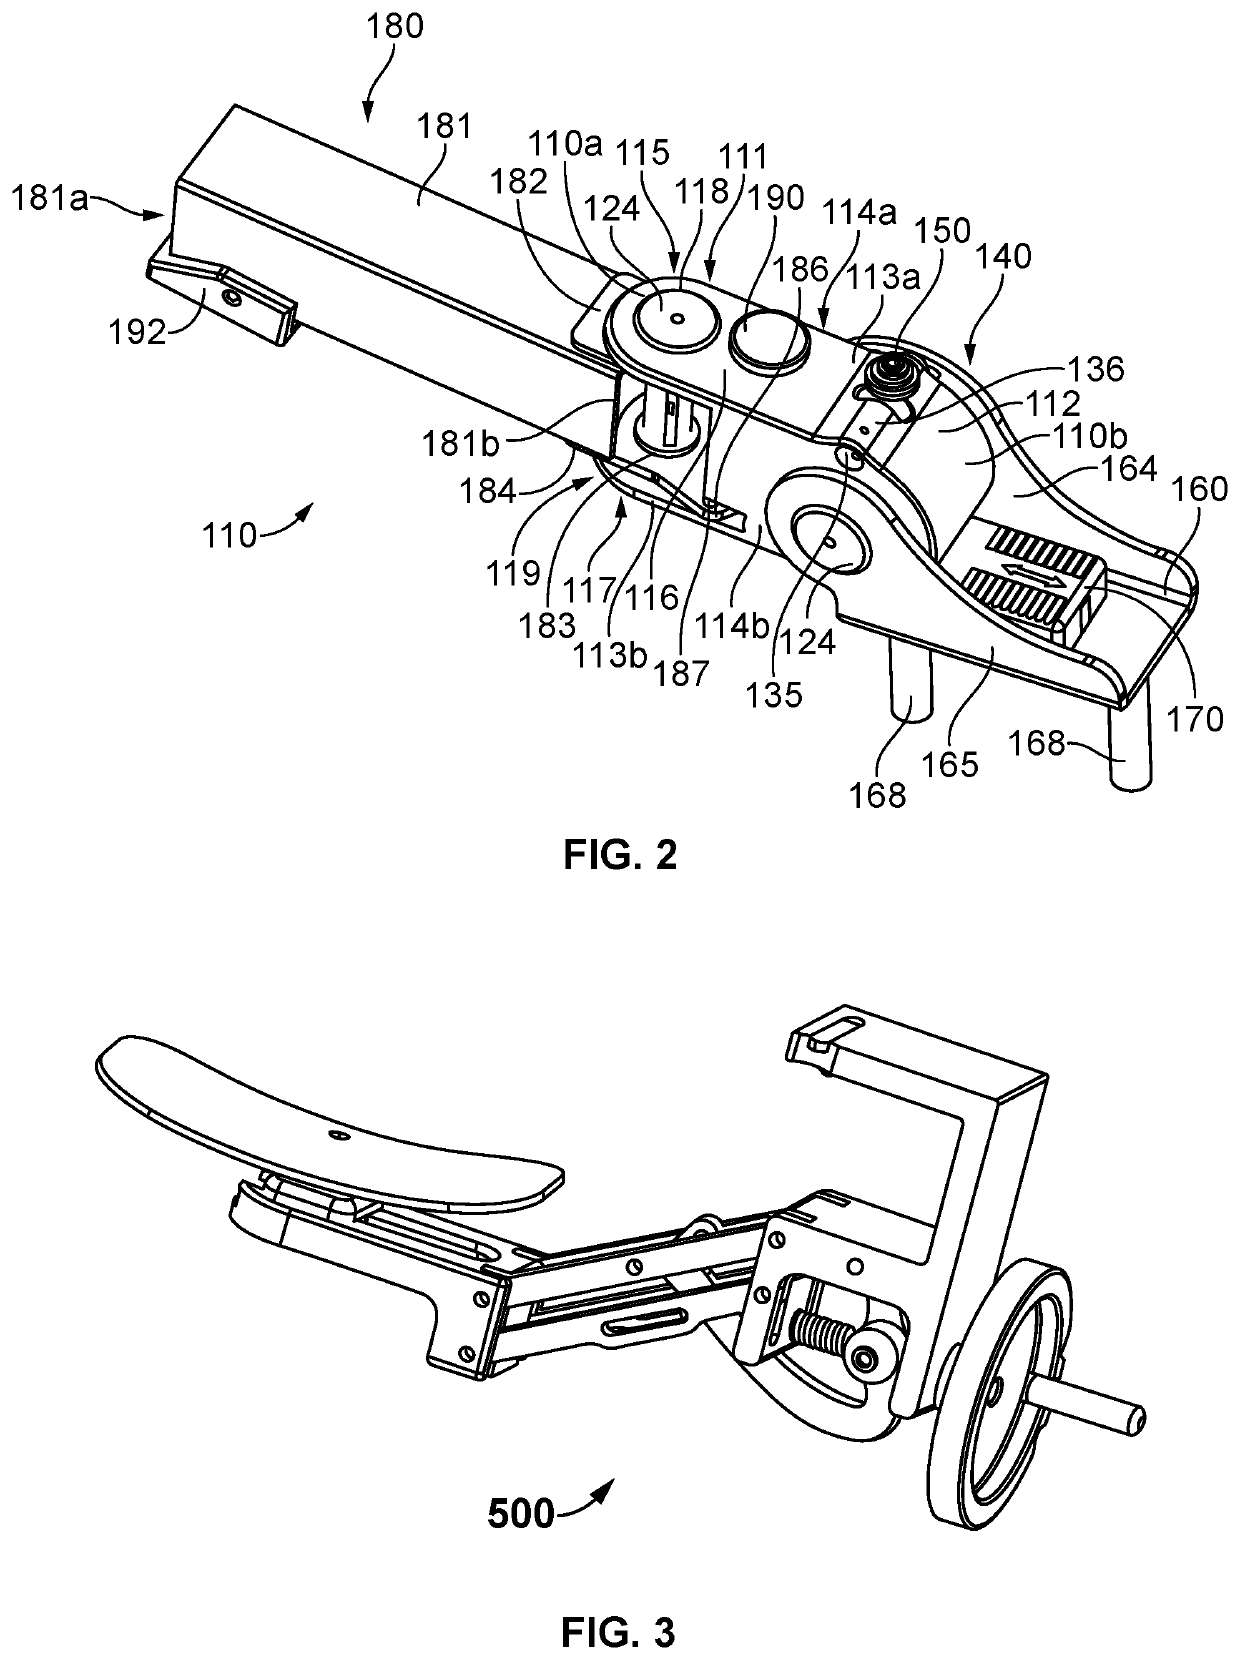 Surgical positioner apparatus, system, and method for securing to a side rail of support table